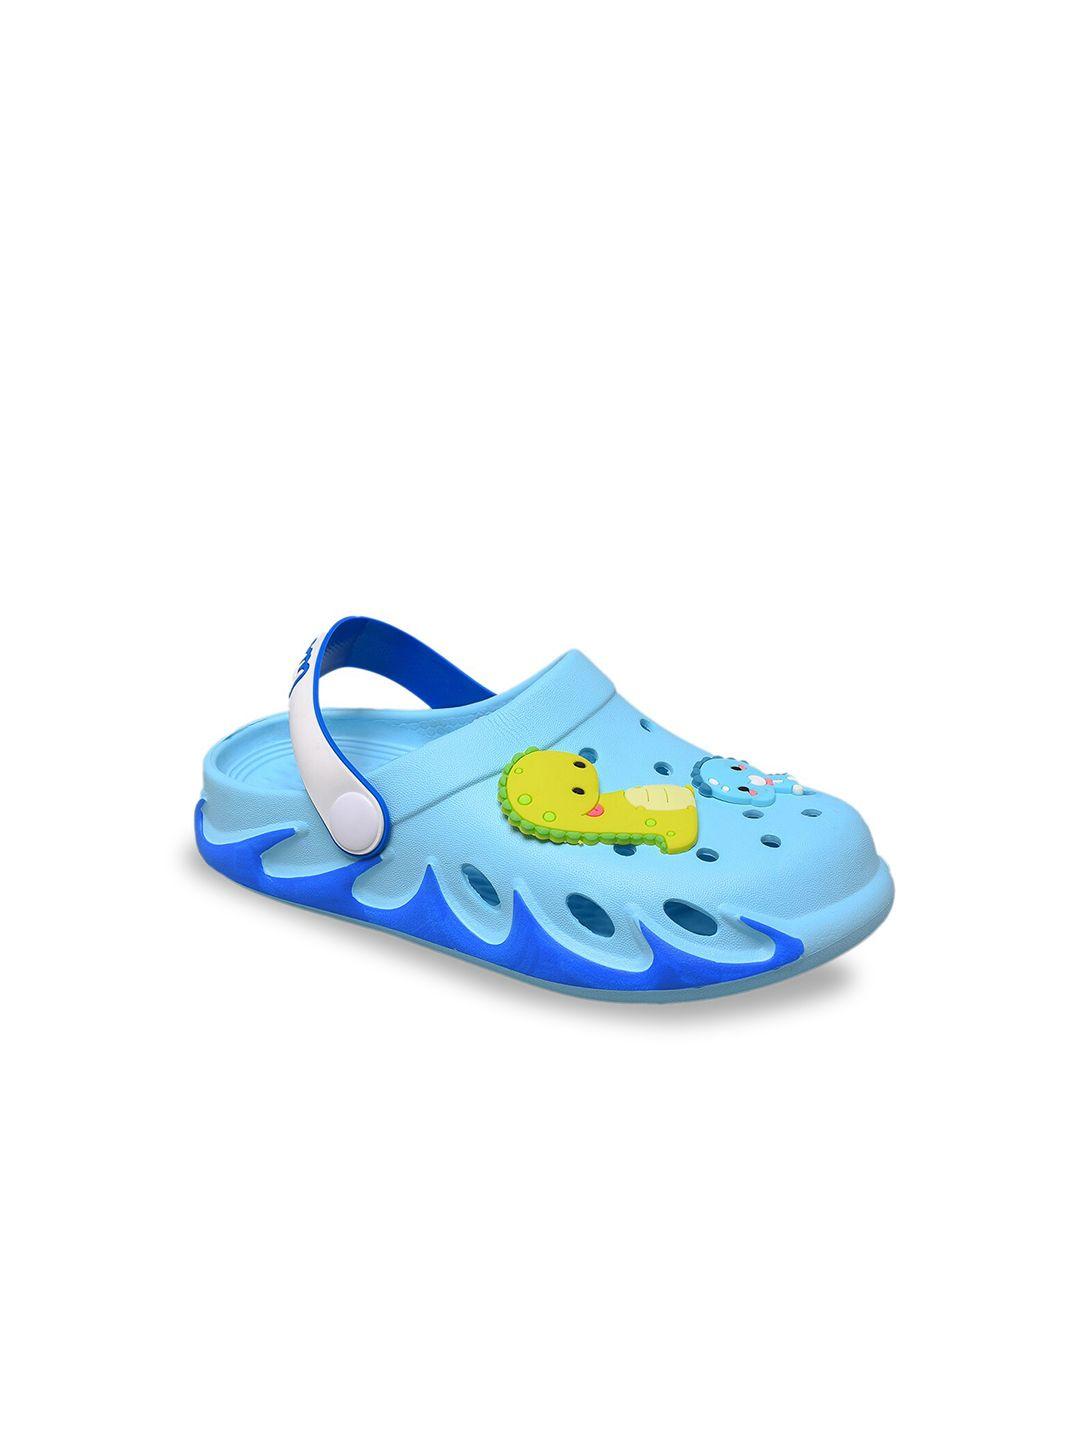 yellow bee boys blue & yellow clogs sandals